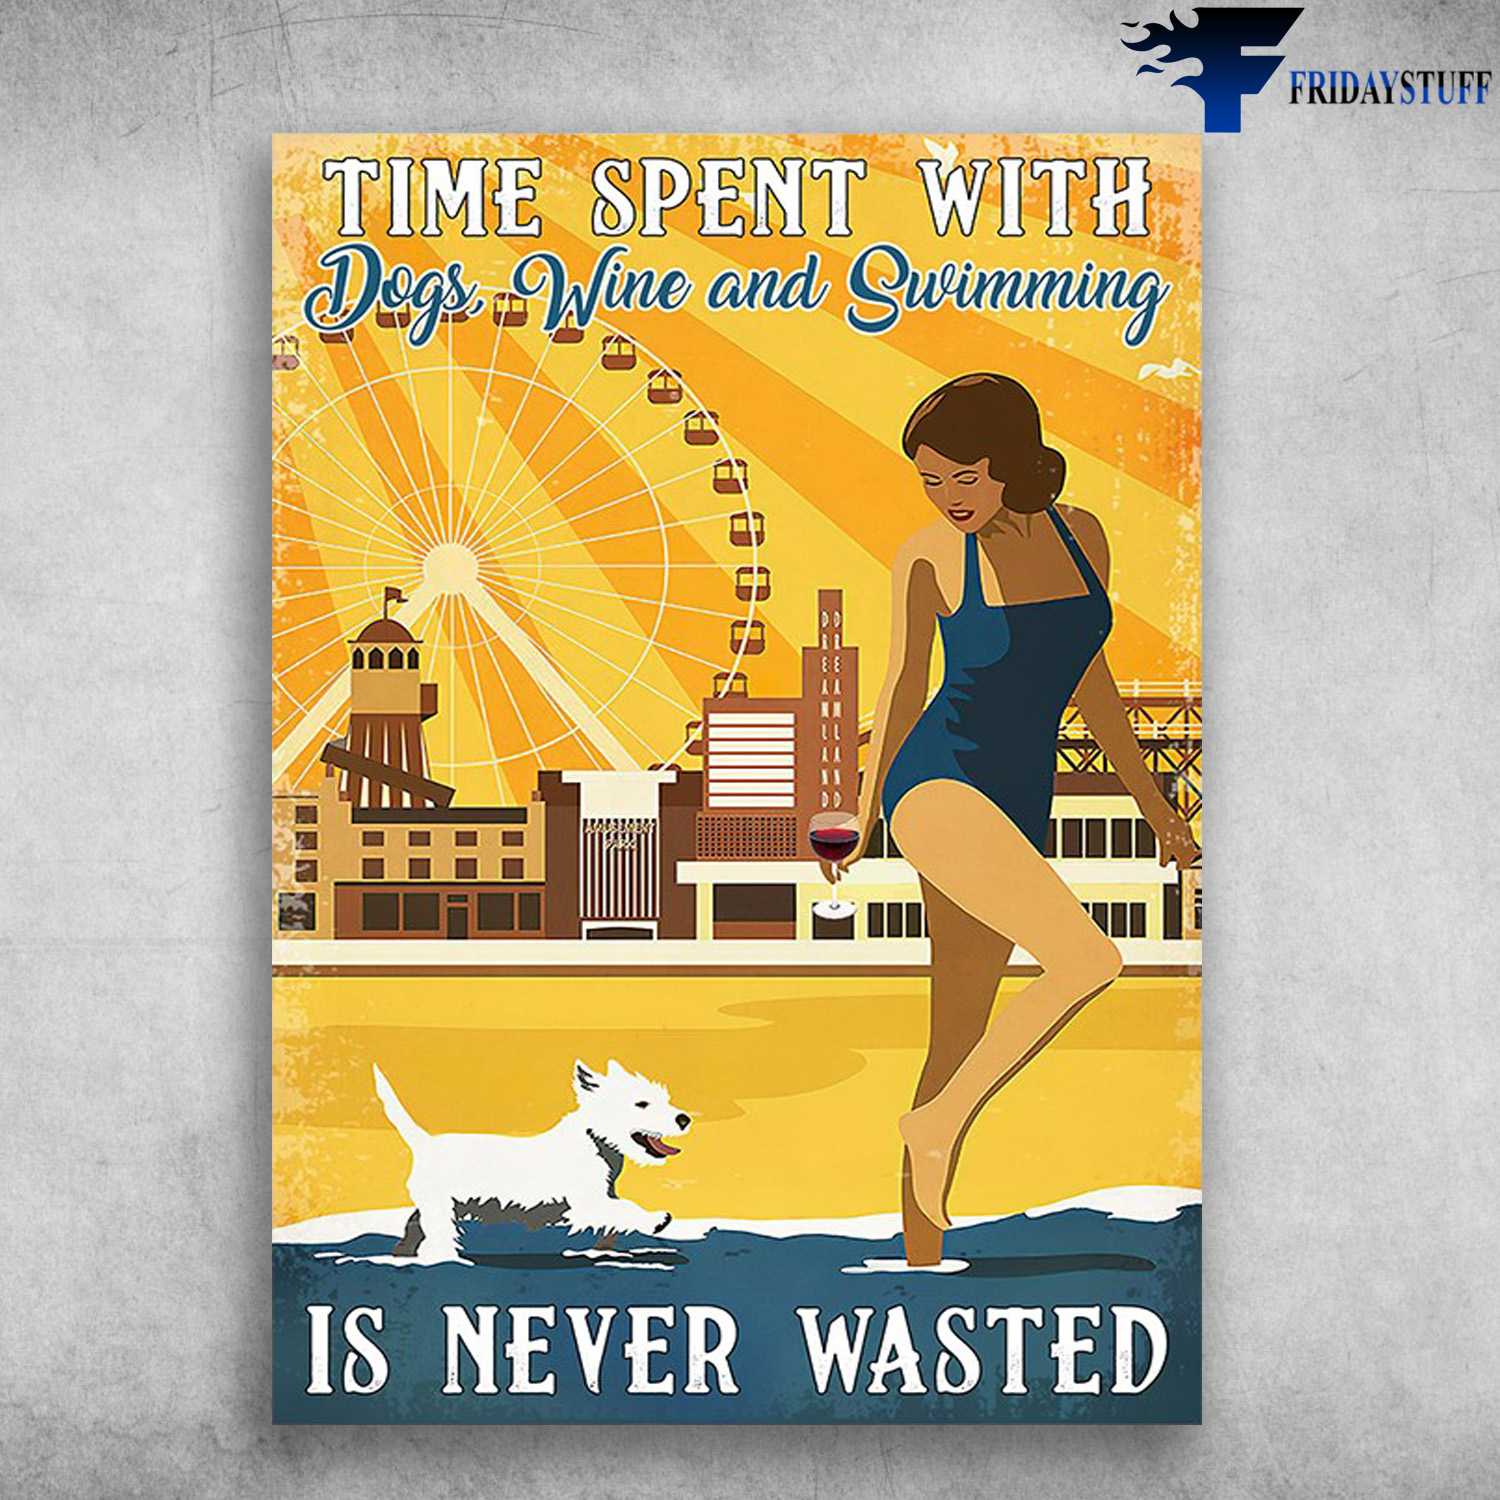 Drink And Swim - Time Spent With Dogs, Wine And Swimming, Is Never Wasted